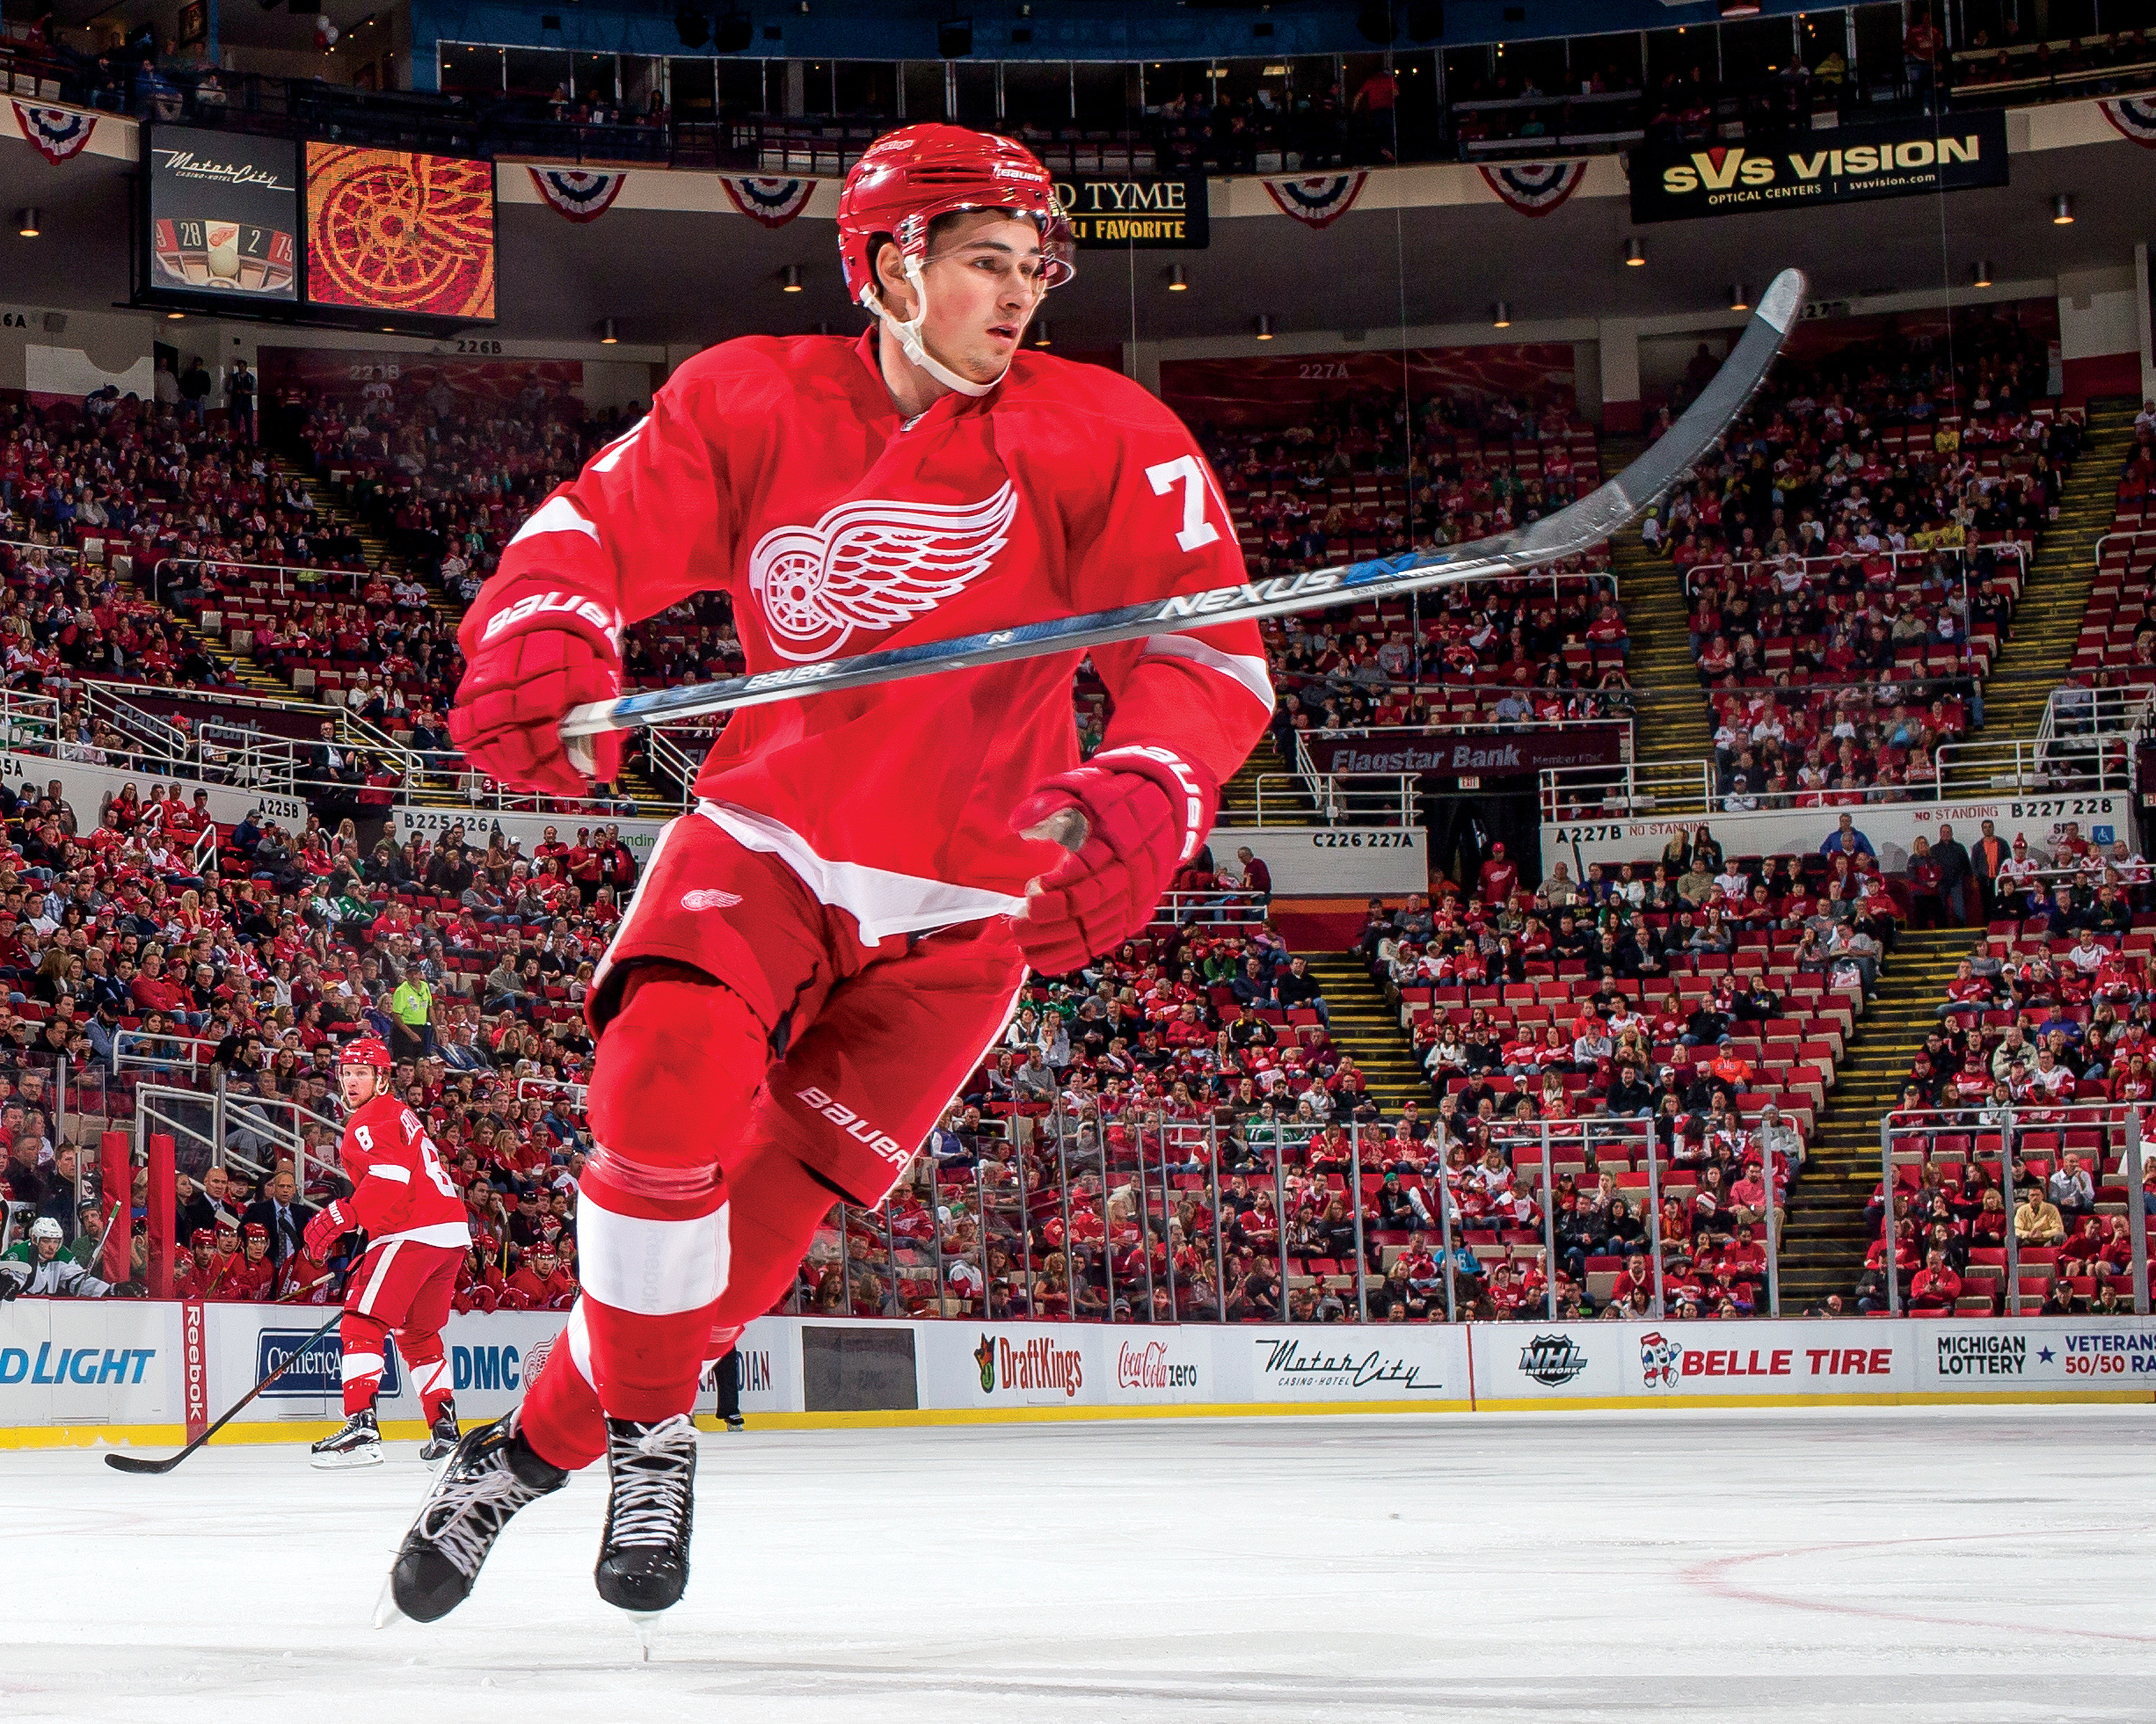 DETROIT, MI - NOVEMBER 08: Dylan Larkin #71 of the Detroit Red Wings follows the play during an NHL game against the Dallas Stars at Joe Louis Arena on November 8, 2015 in Detroit, Michigan. The Stars defeated the Wings 4-1. (Photo by Dave Reginek/NHLI via Getty Images)